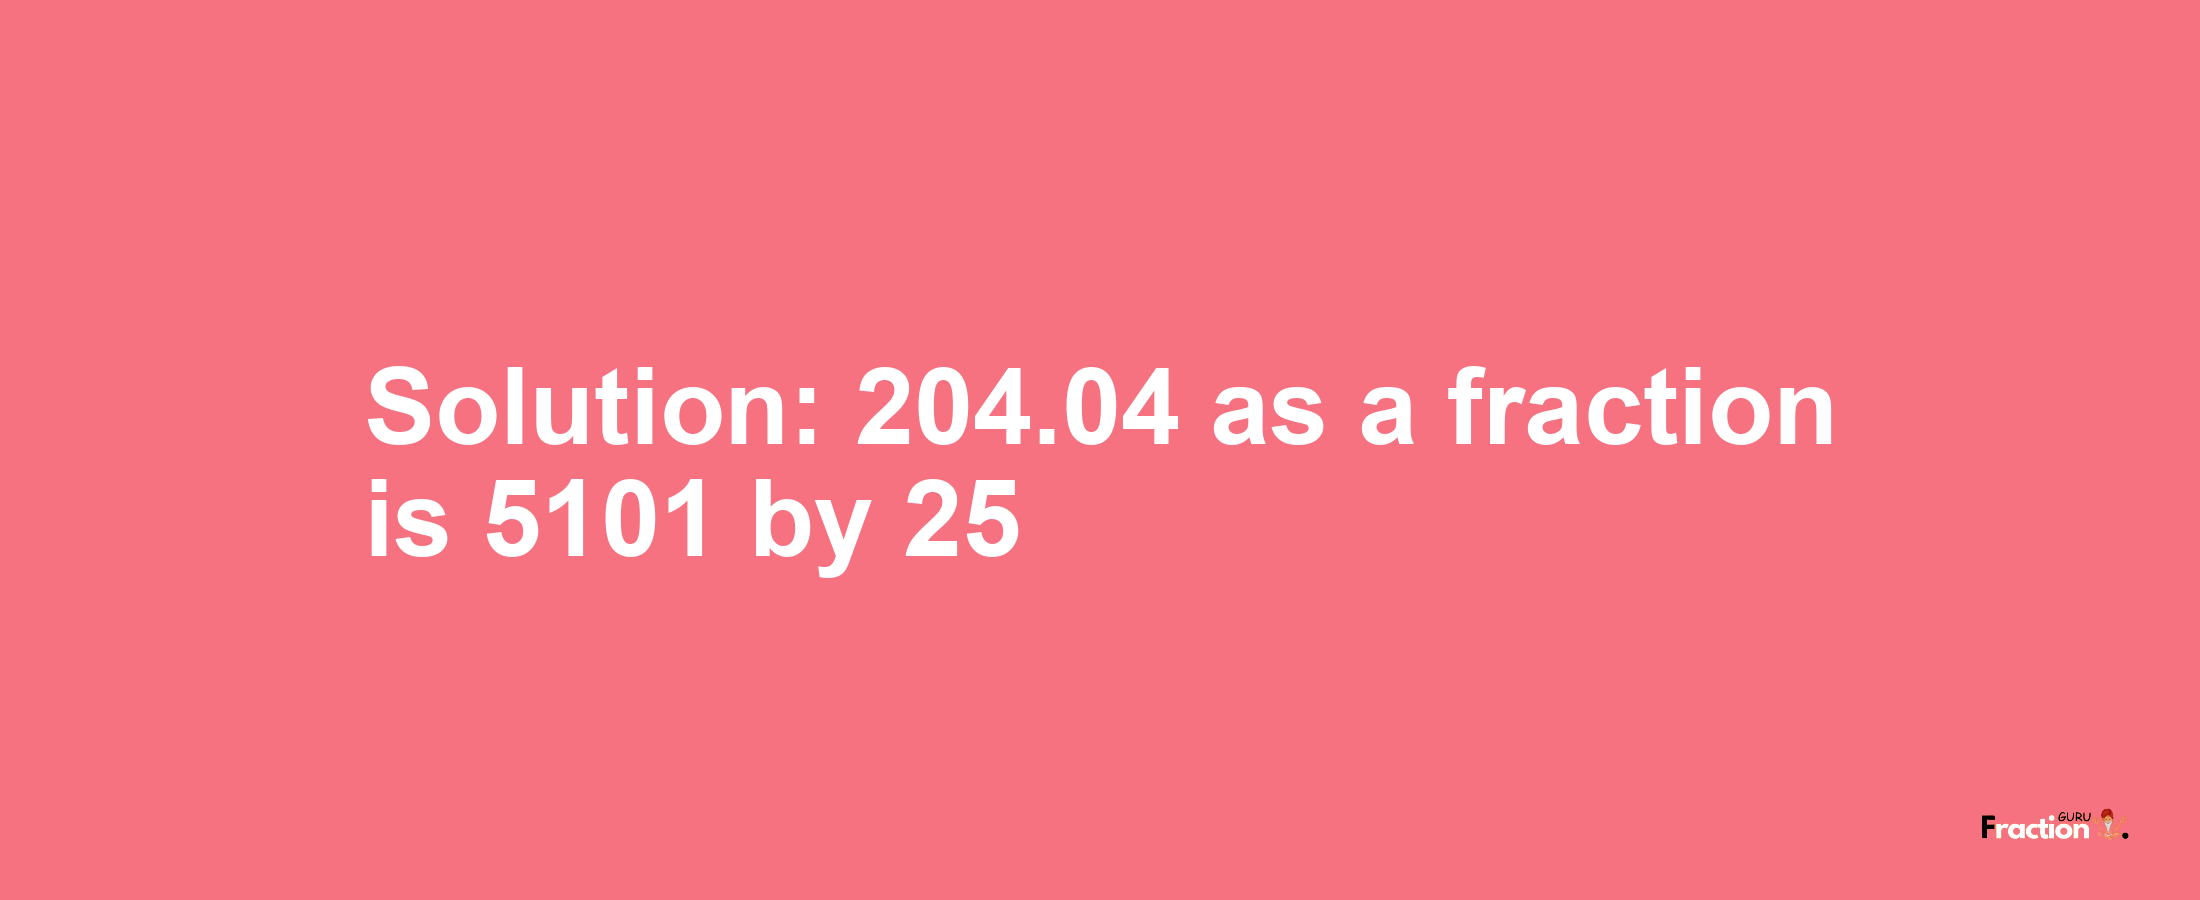 Solution:204.04 as a fraction is 5101/25